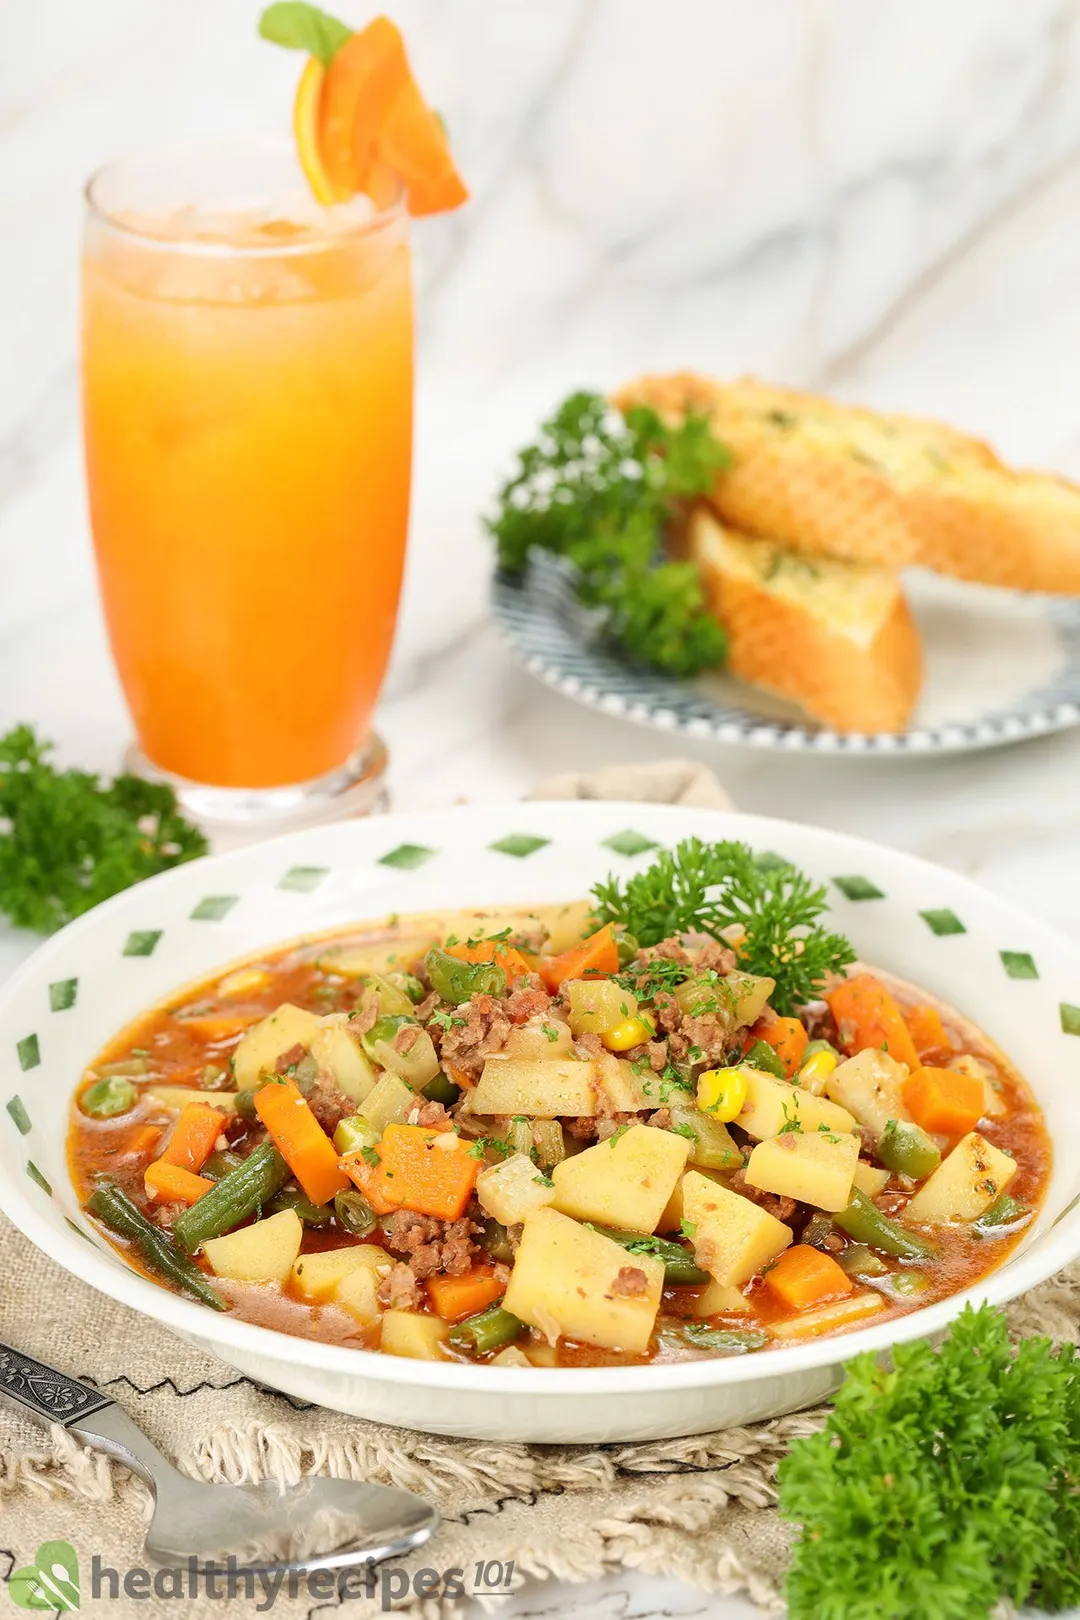 a plate of ground beef soup next to a glass of juice and a plate of garlic bread